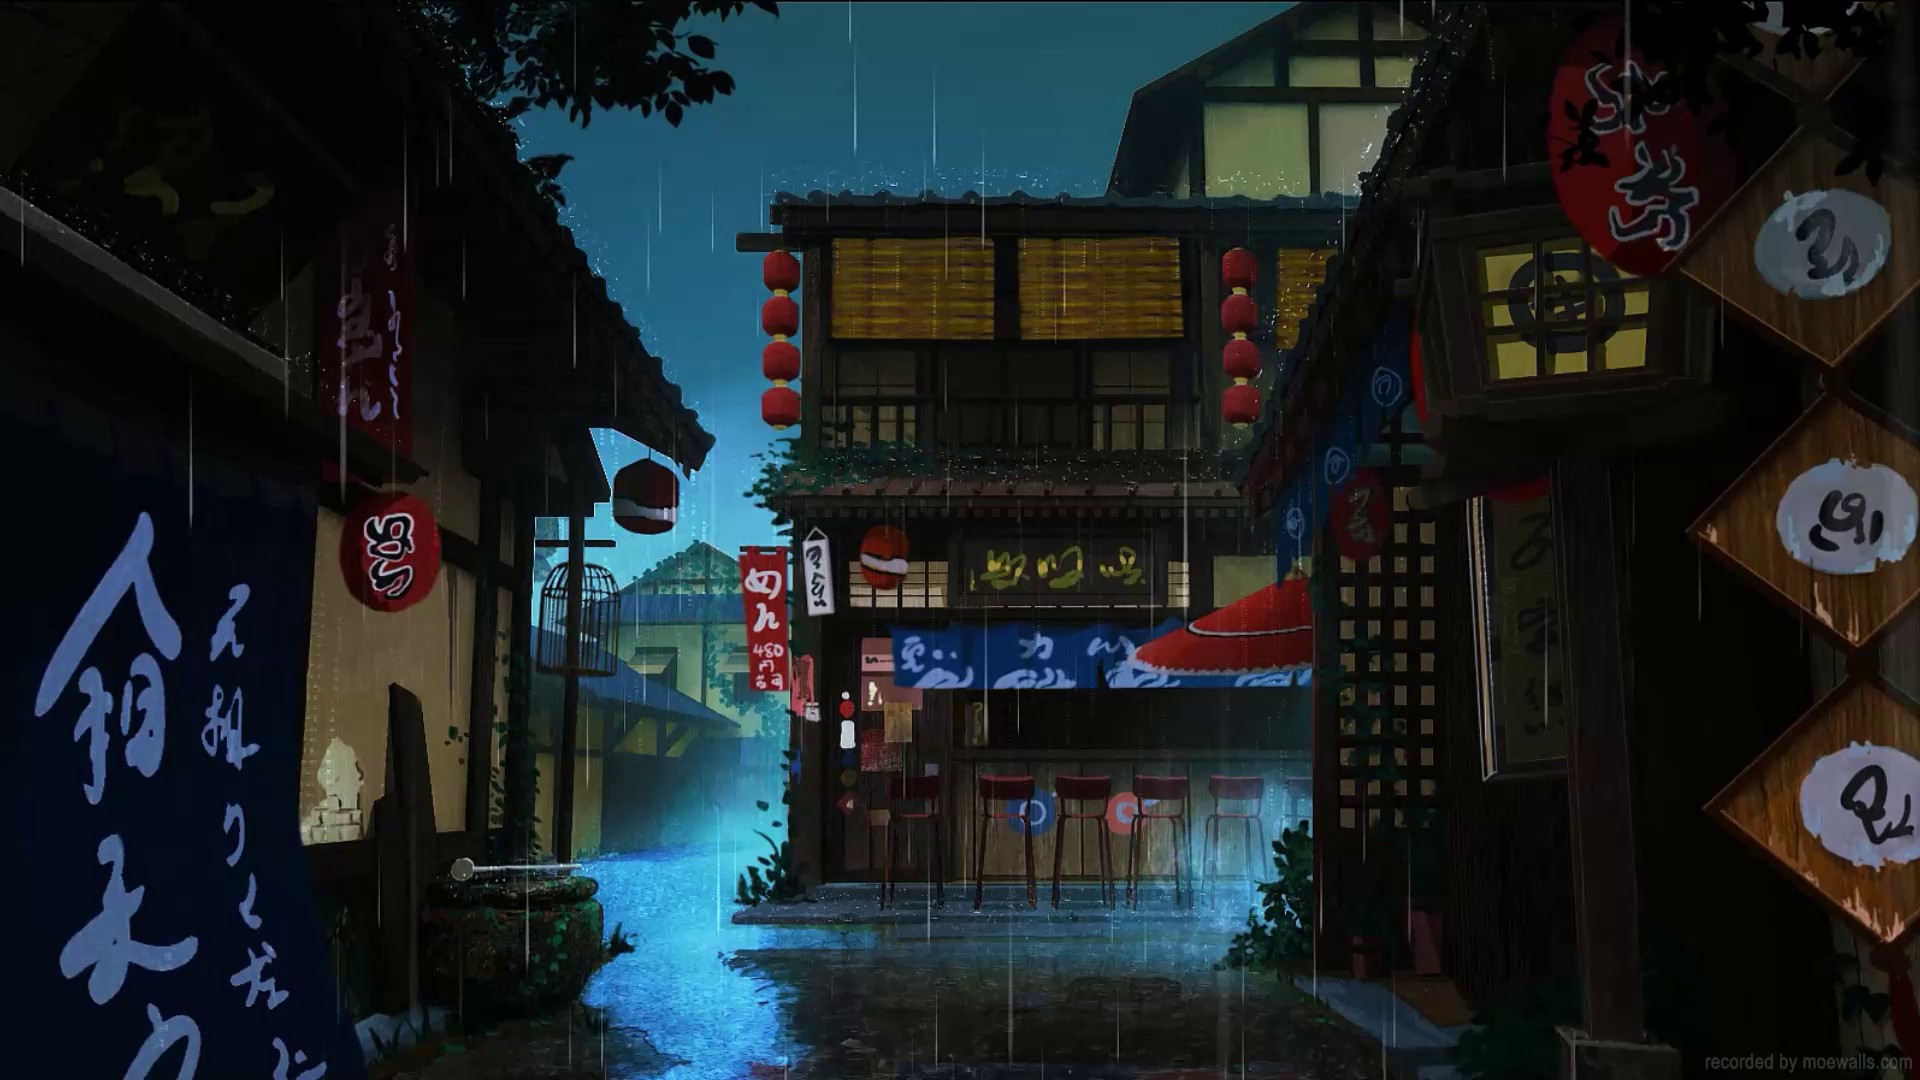 The City Streets At Night In A Japanese City Background, Aesthetic Street  Pictures Background Image And Wallpaper for Free Download